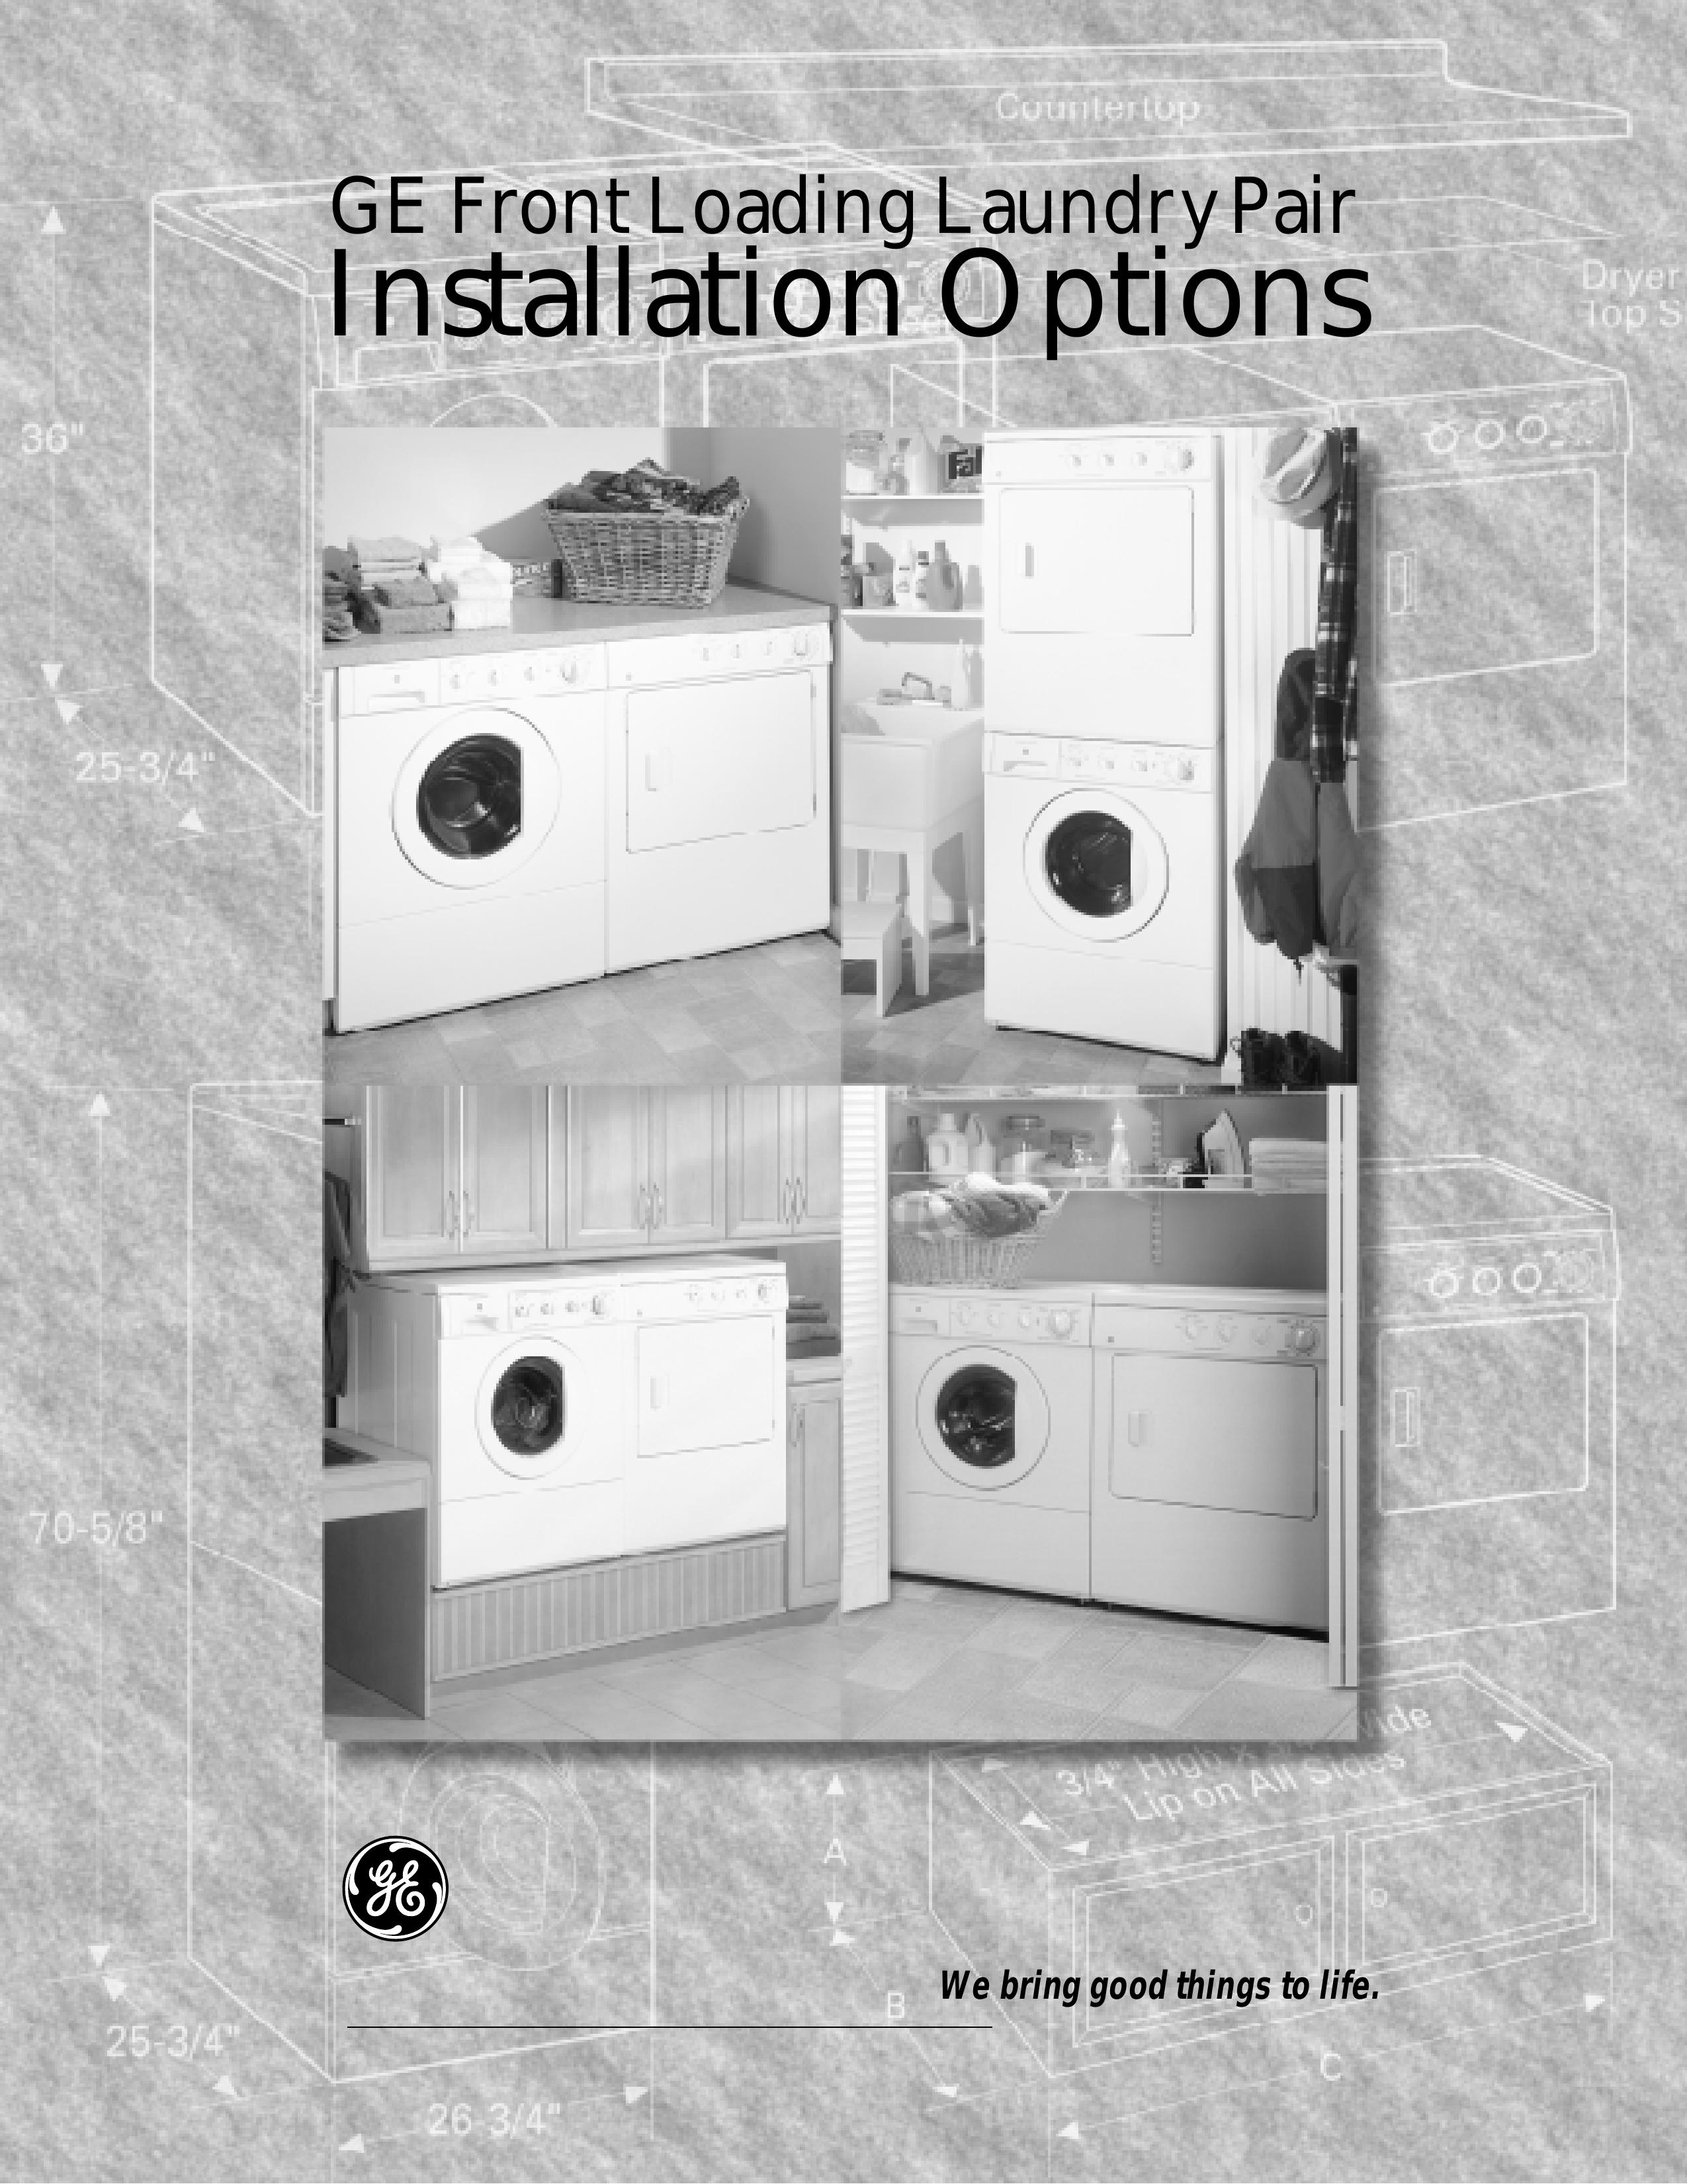 GE 14-A037 Washer/Dryer User Manual